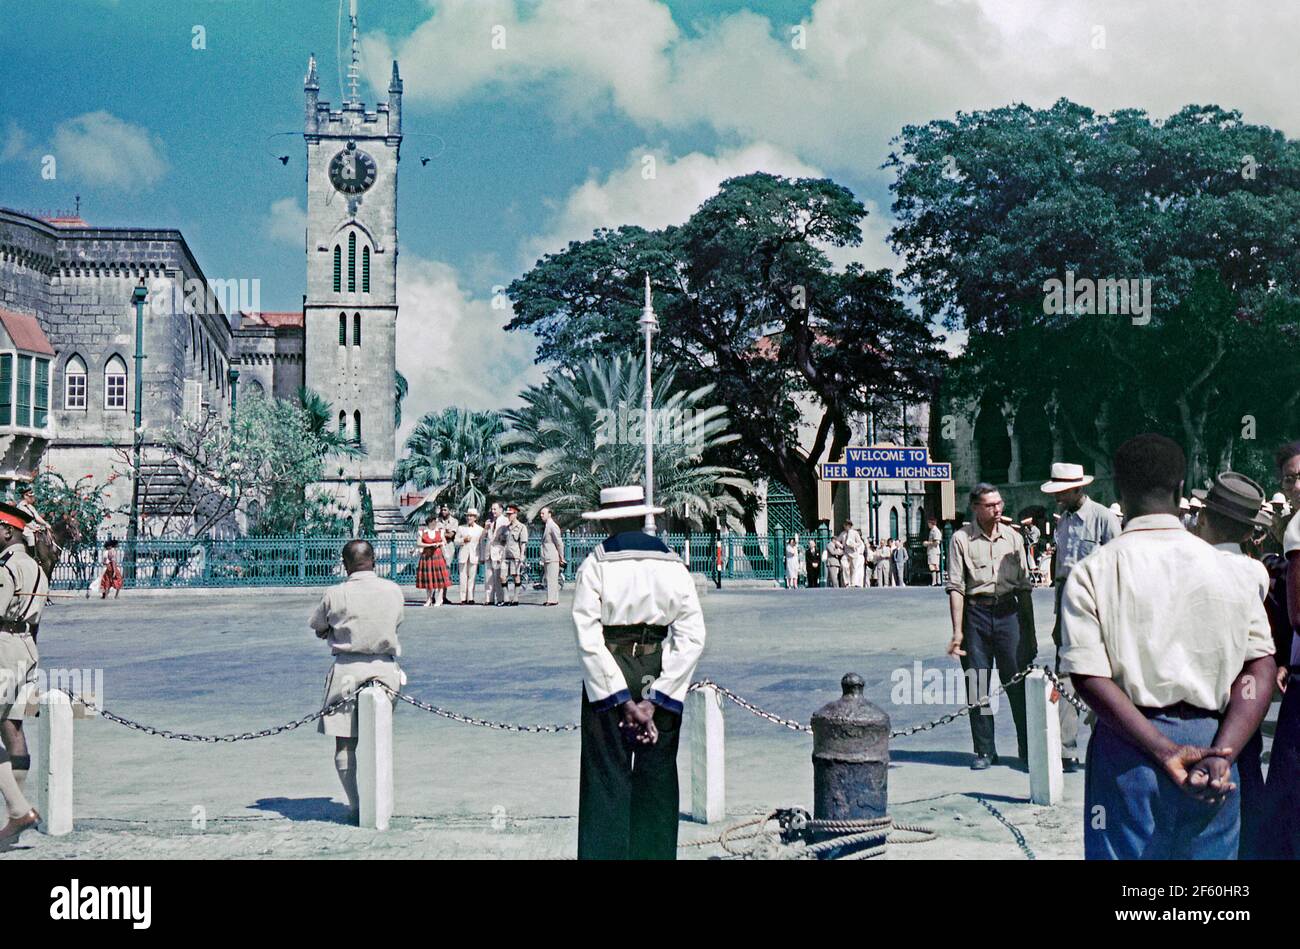 Crowd scenes in Bridgetown, Barbados, 1955, during Princess Margaret’s Caribbean tour. Here a welcome sign is displayed outside the neo-Gothic Parliament Buildings in Parliament Square. In January 1955, the Princess made the first of many trips to the Caribbean, her tour aboard Britannia to the British colonies was popular throughout the West Indies. Princess Margaret, (1930 – 2002) was the younger daughter of King George VI and Queen Elizabeth, and the sister of Queen Elizabeth II. This image is from an old amateur 35mm colour transparency – a vintage 1950s photograph. Stock Photo